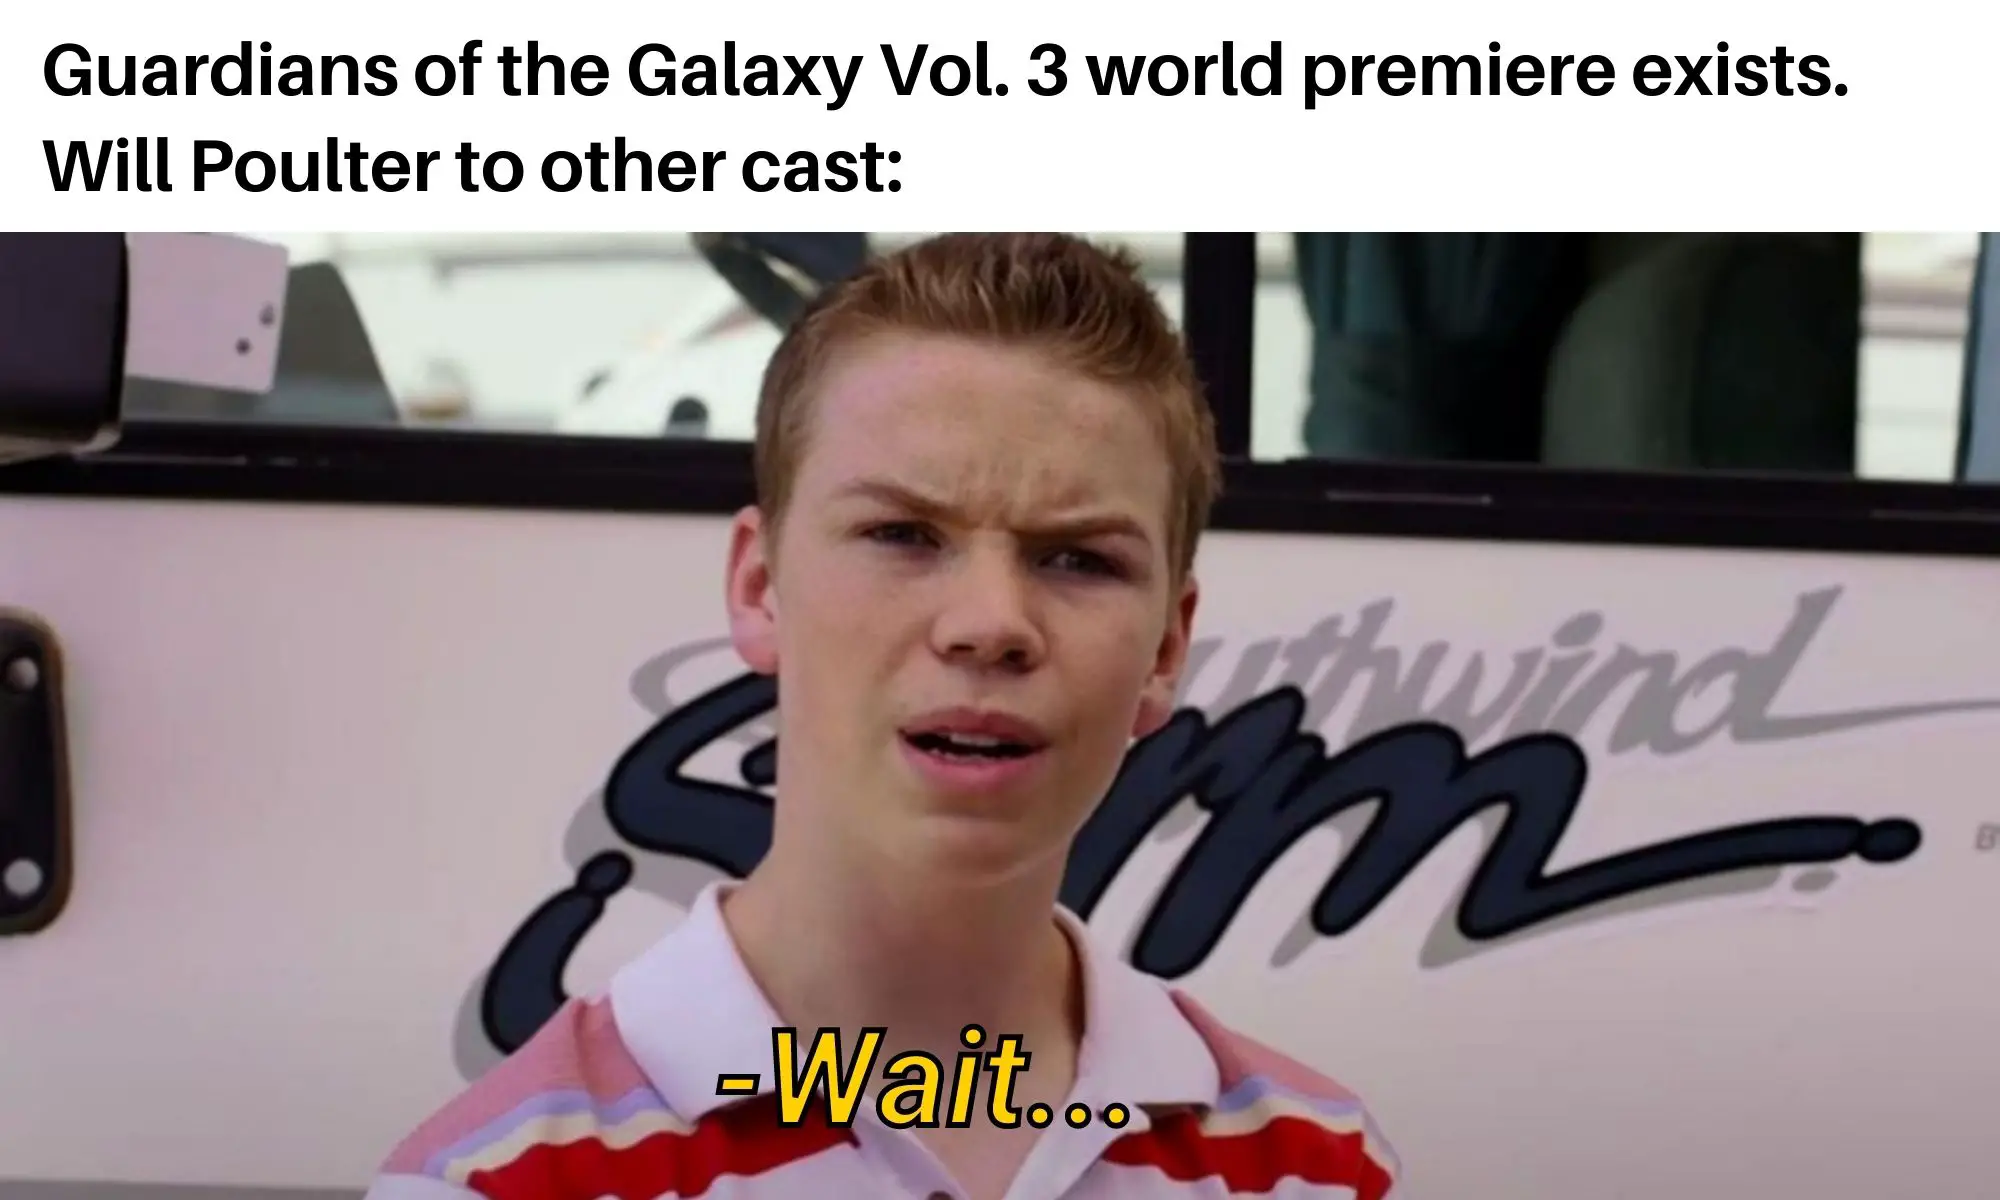 Will Poulter meme on Guardians of the Galaxy Vol. 3